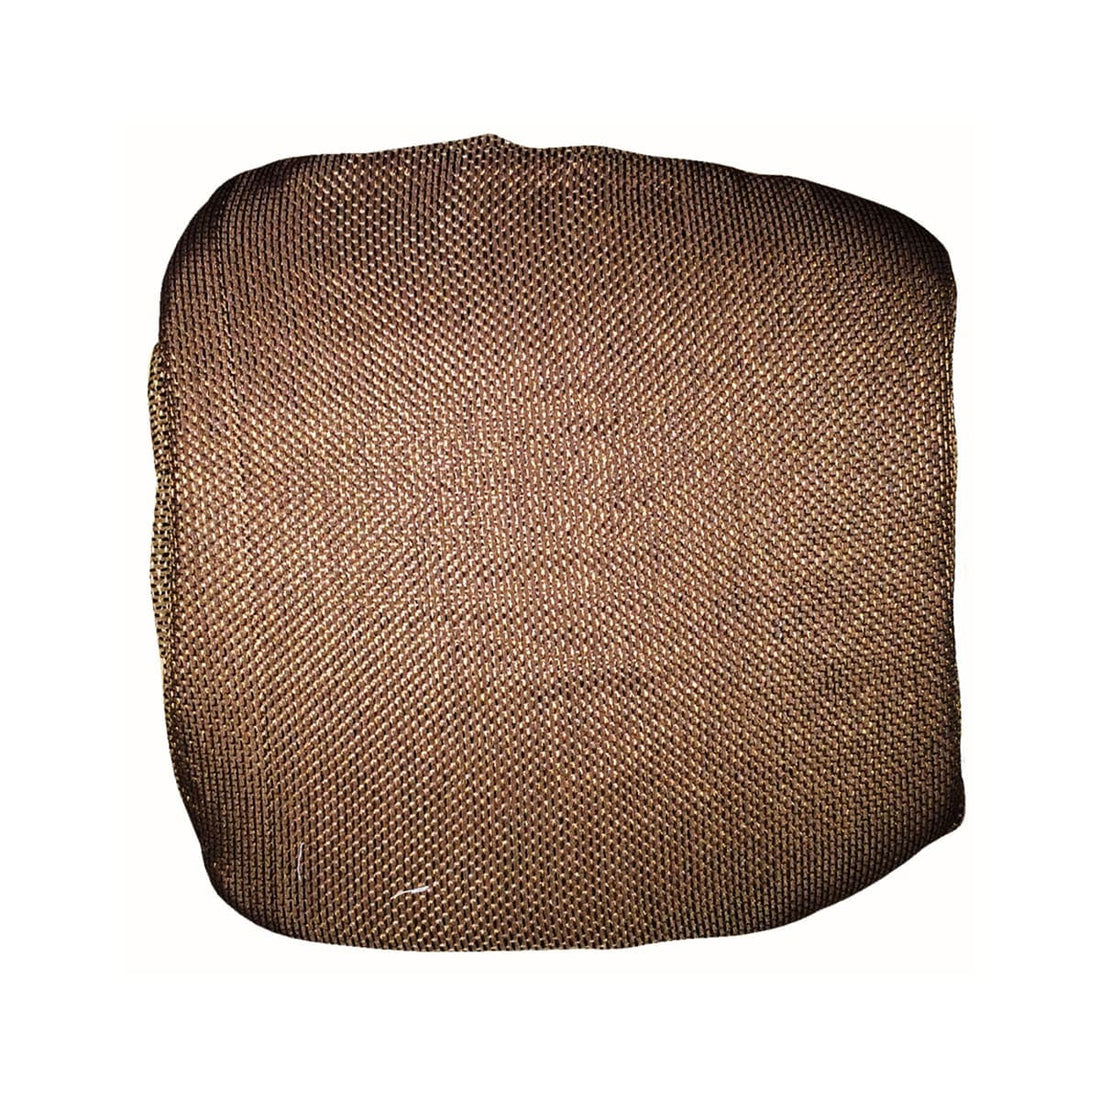 ANTONELLA 42X42 CM CHAIR COVER WITH BROWN ELASTIC BAND - best price from Maltashopper.com BR480006599